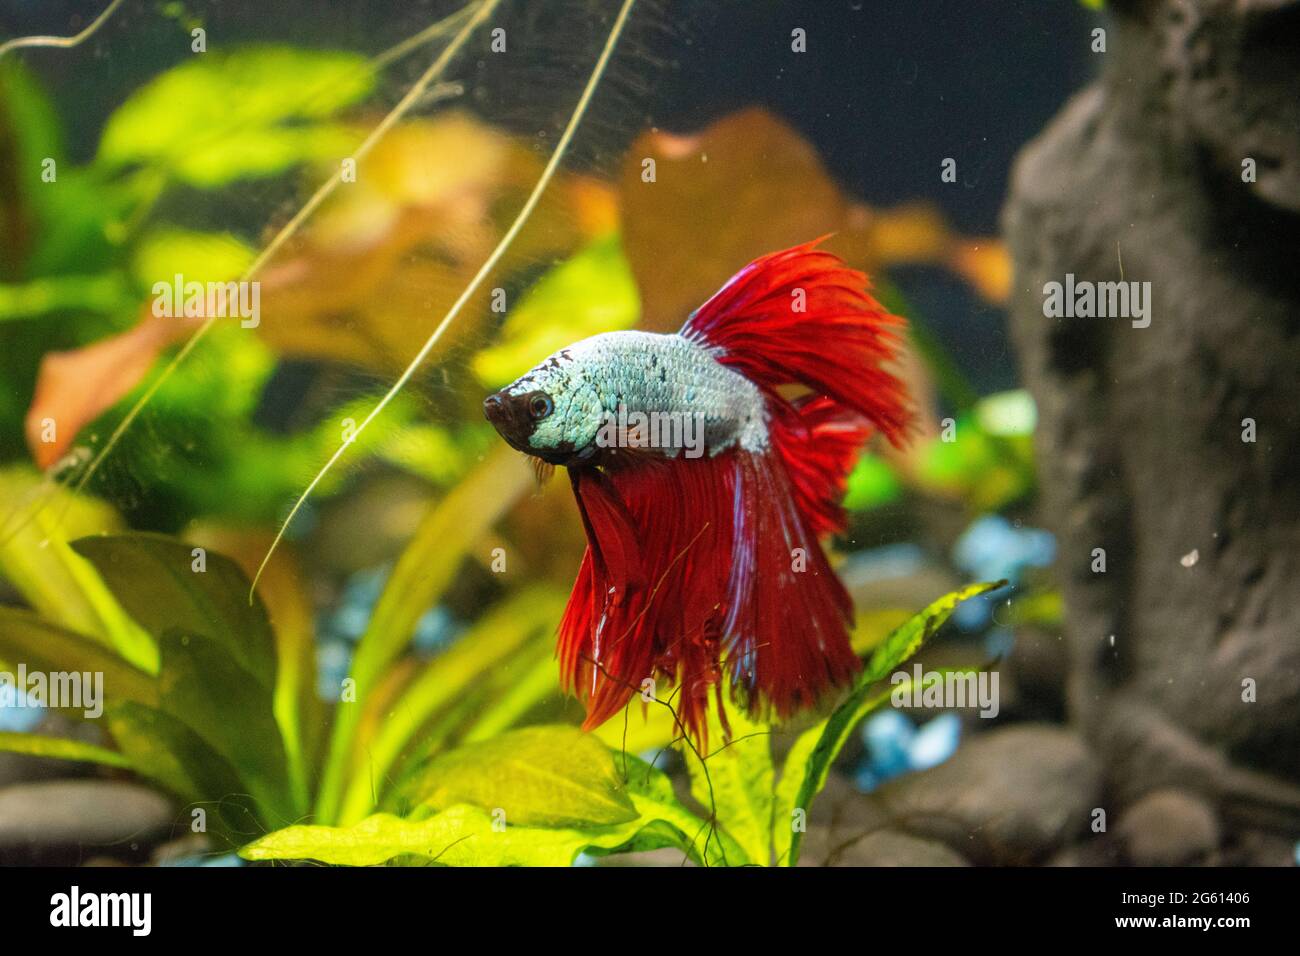 Deep red Dragon Betta fish with a teal body, in-home aquarium. Swimming to the top of the aquarium with floating plants Stock Photo